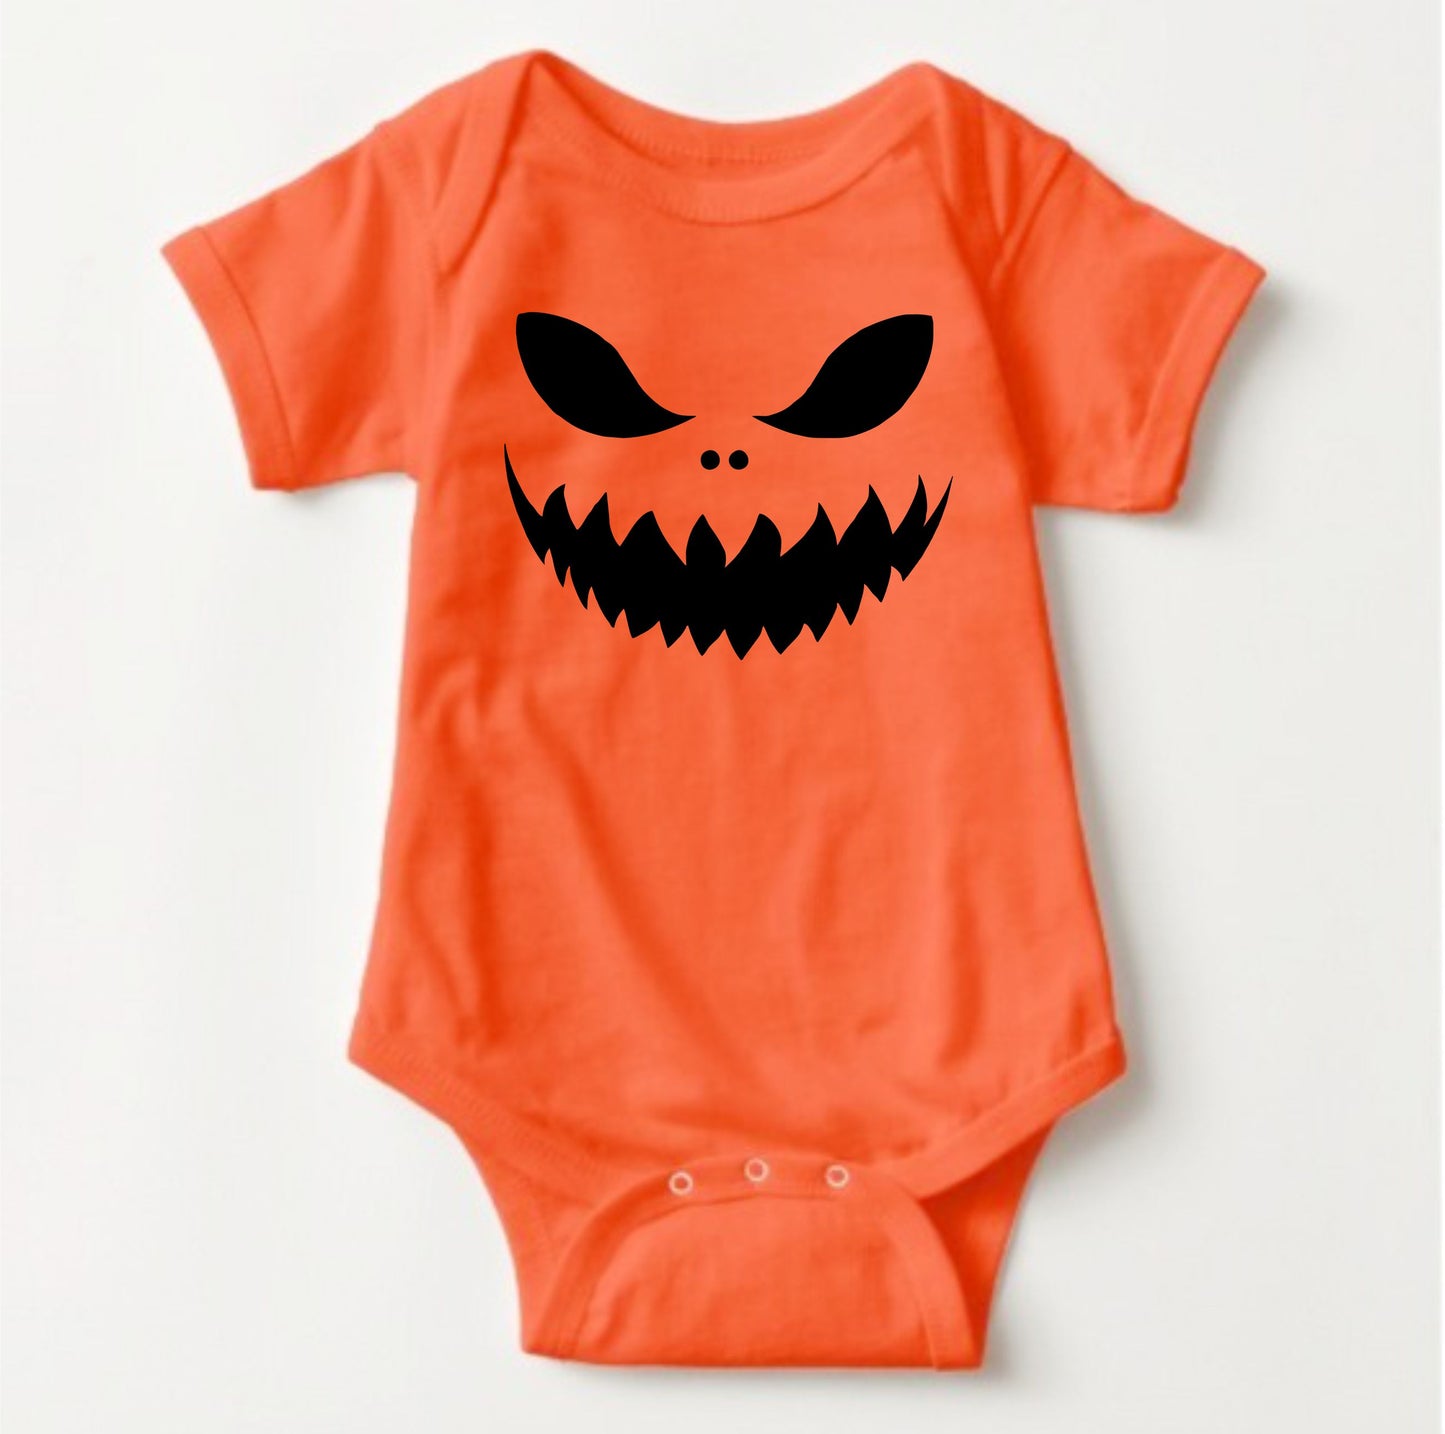 Baby Halloween Onesies - Monster Scary Face